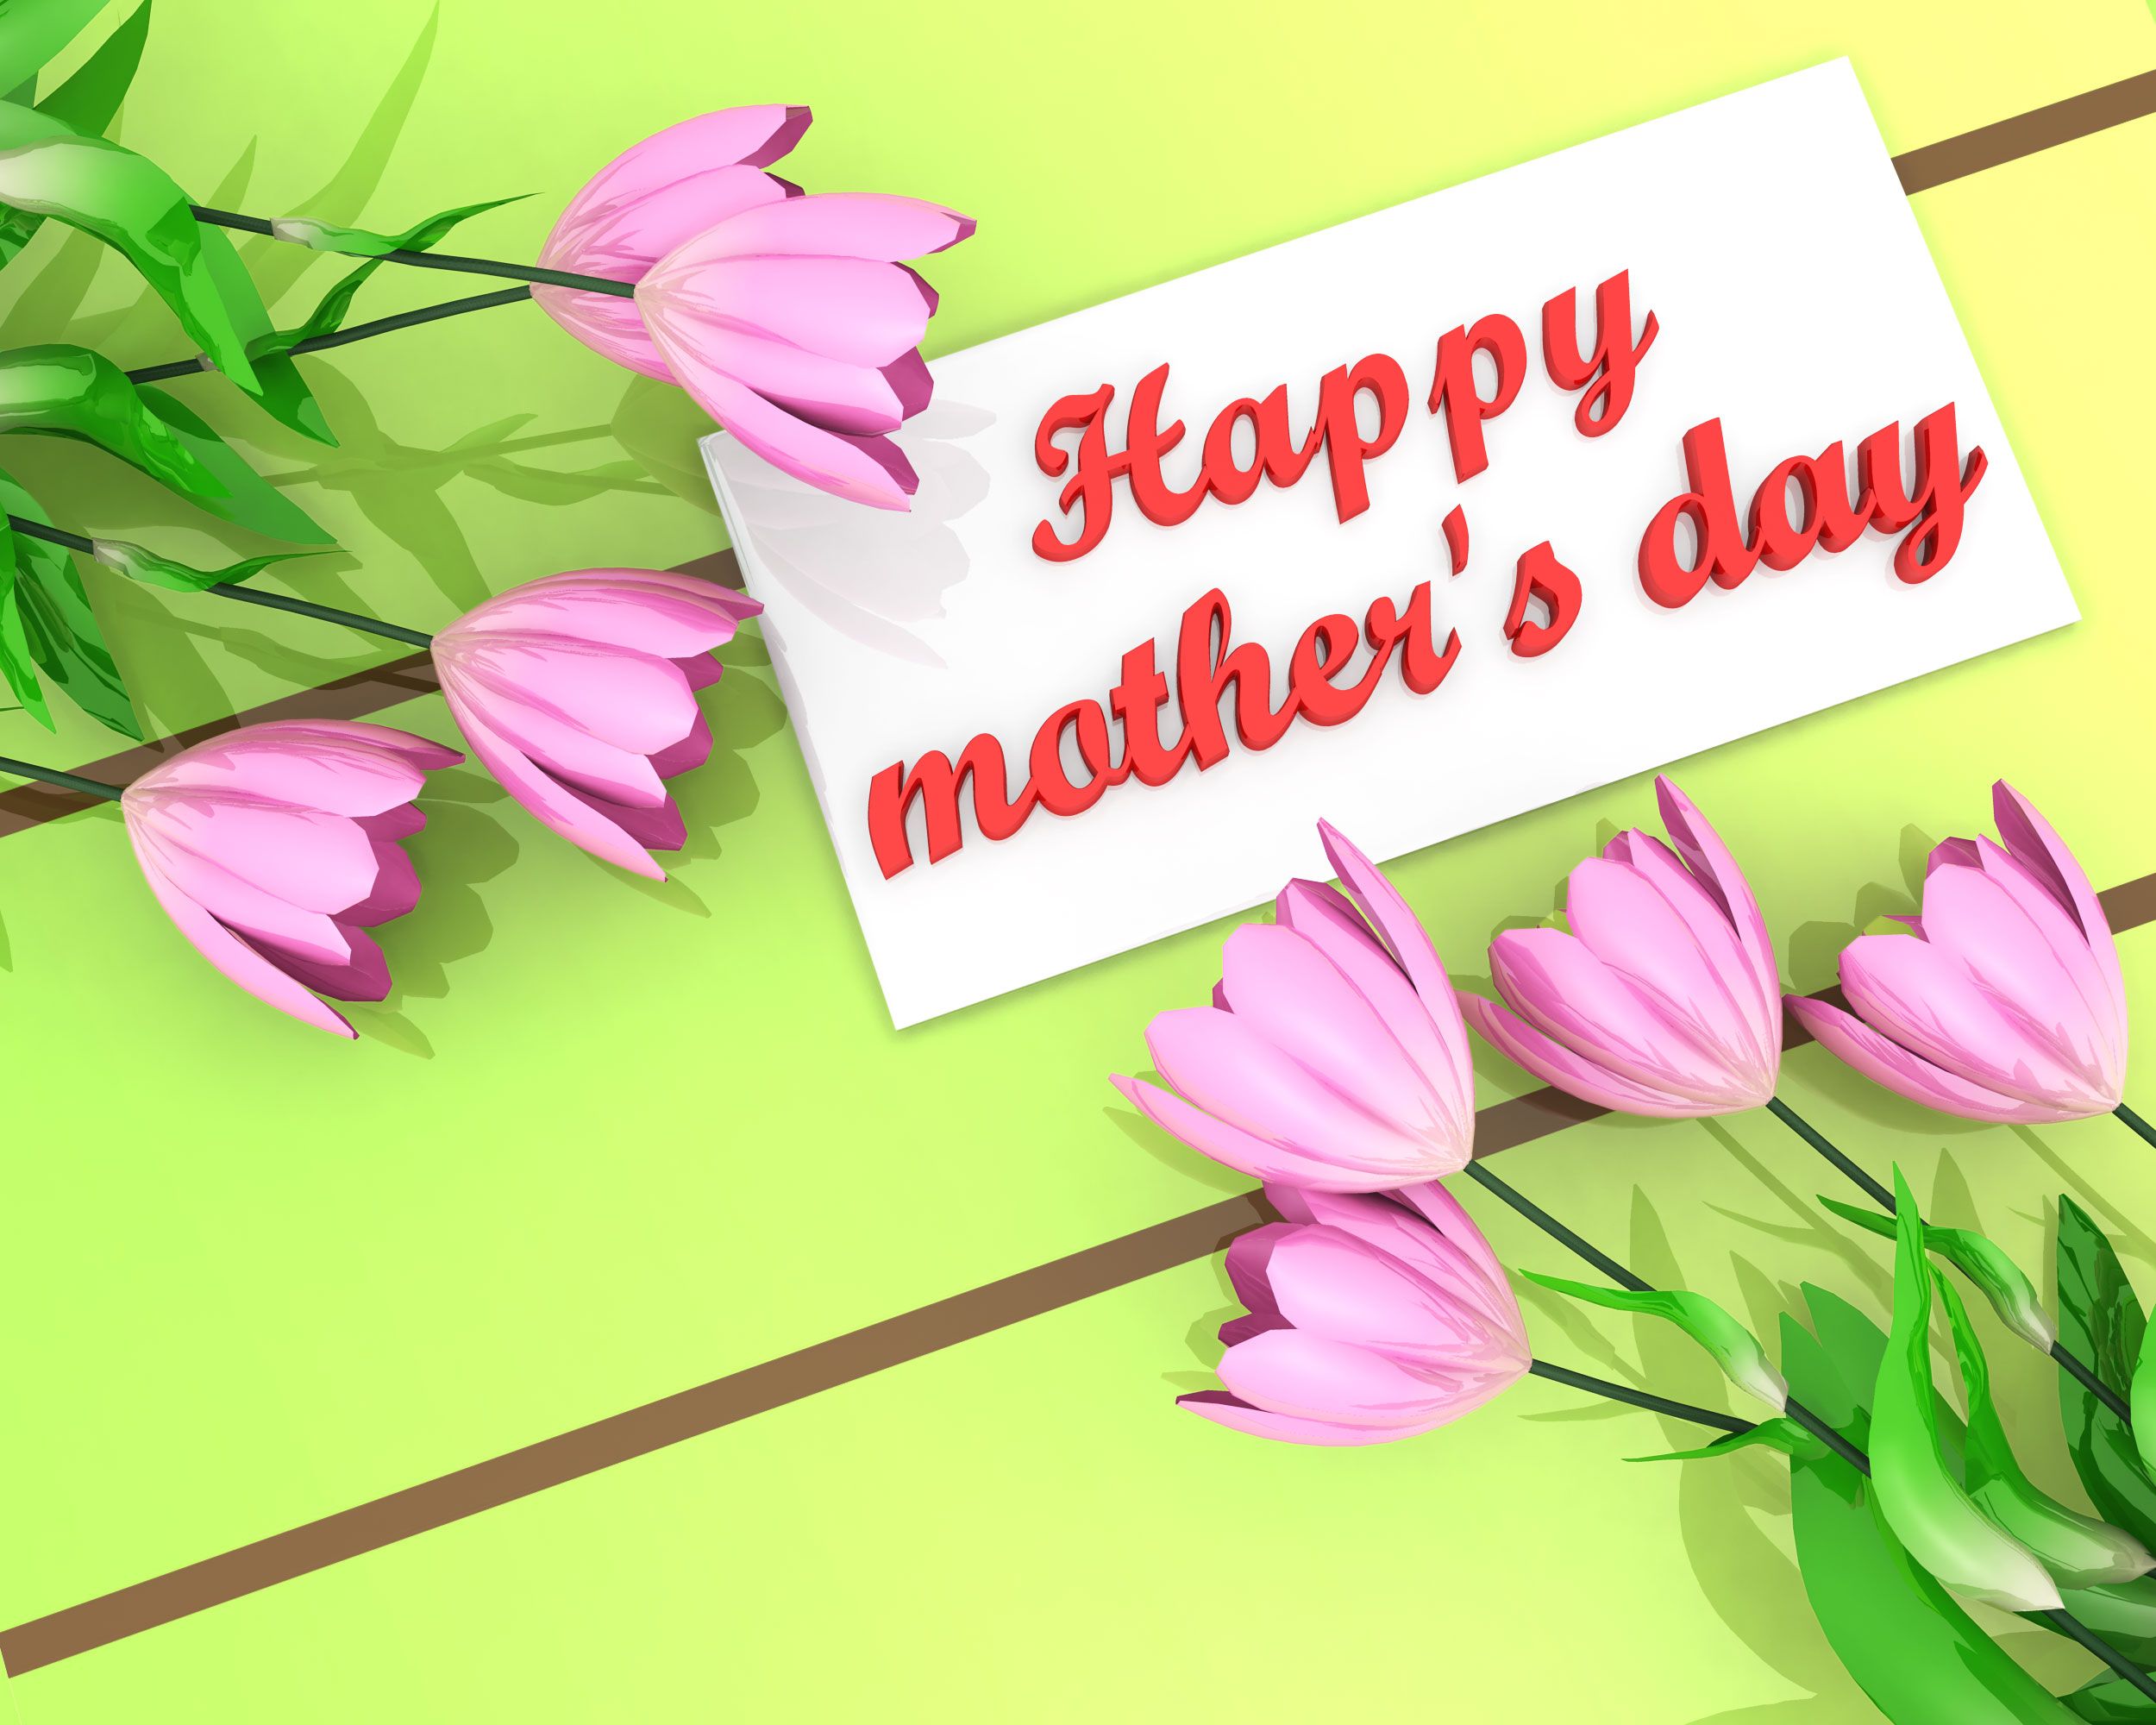 wishes-for-happy-mothers-day-stock-photo-ppt-images-gallery